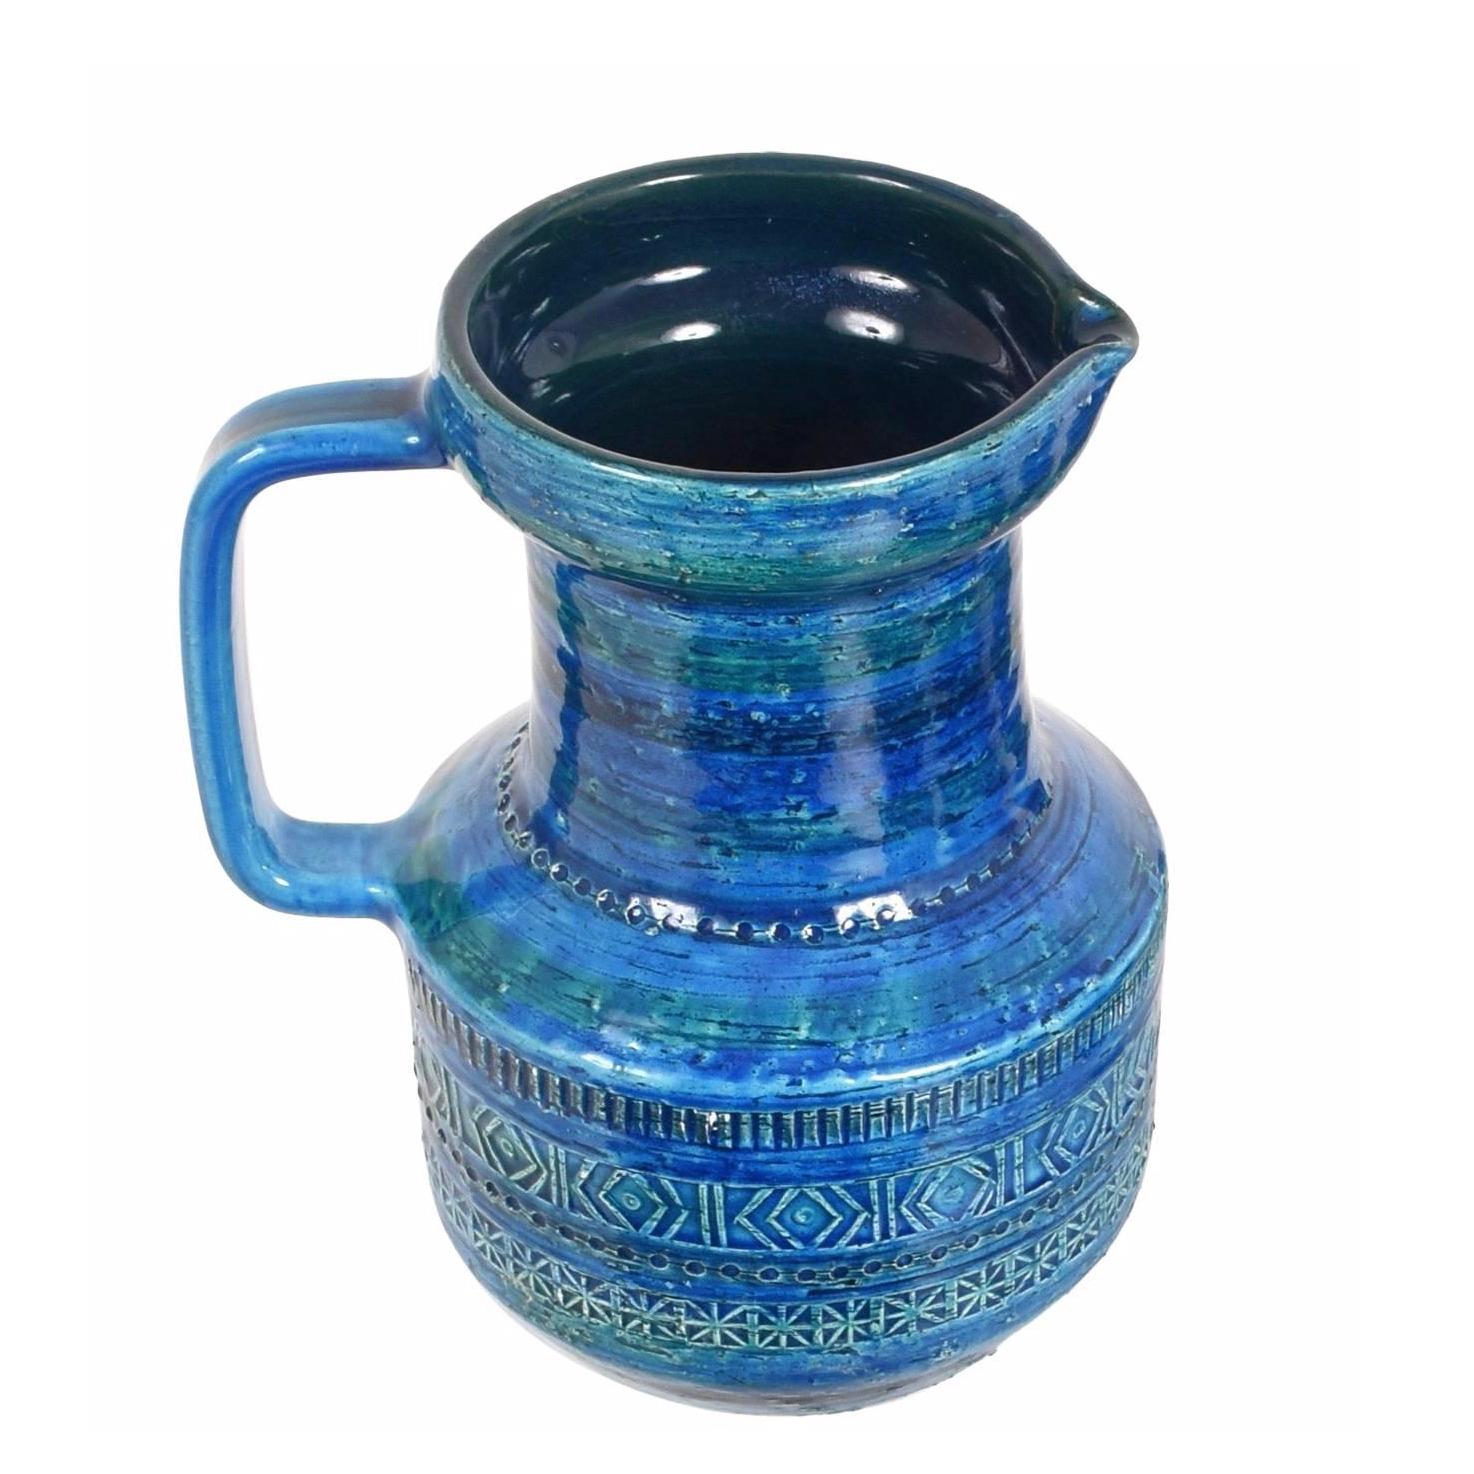 Set of blue enameled blue glazed ceramic carafe and glasses by Aldo Londi of Rimini and produced by Bitossi. Handmade in Italy with a hand carved geometric design and in satin turquoise and vibrant cobalt blue, Italy, 1950s-1960s.
A carafe and six